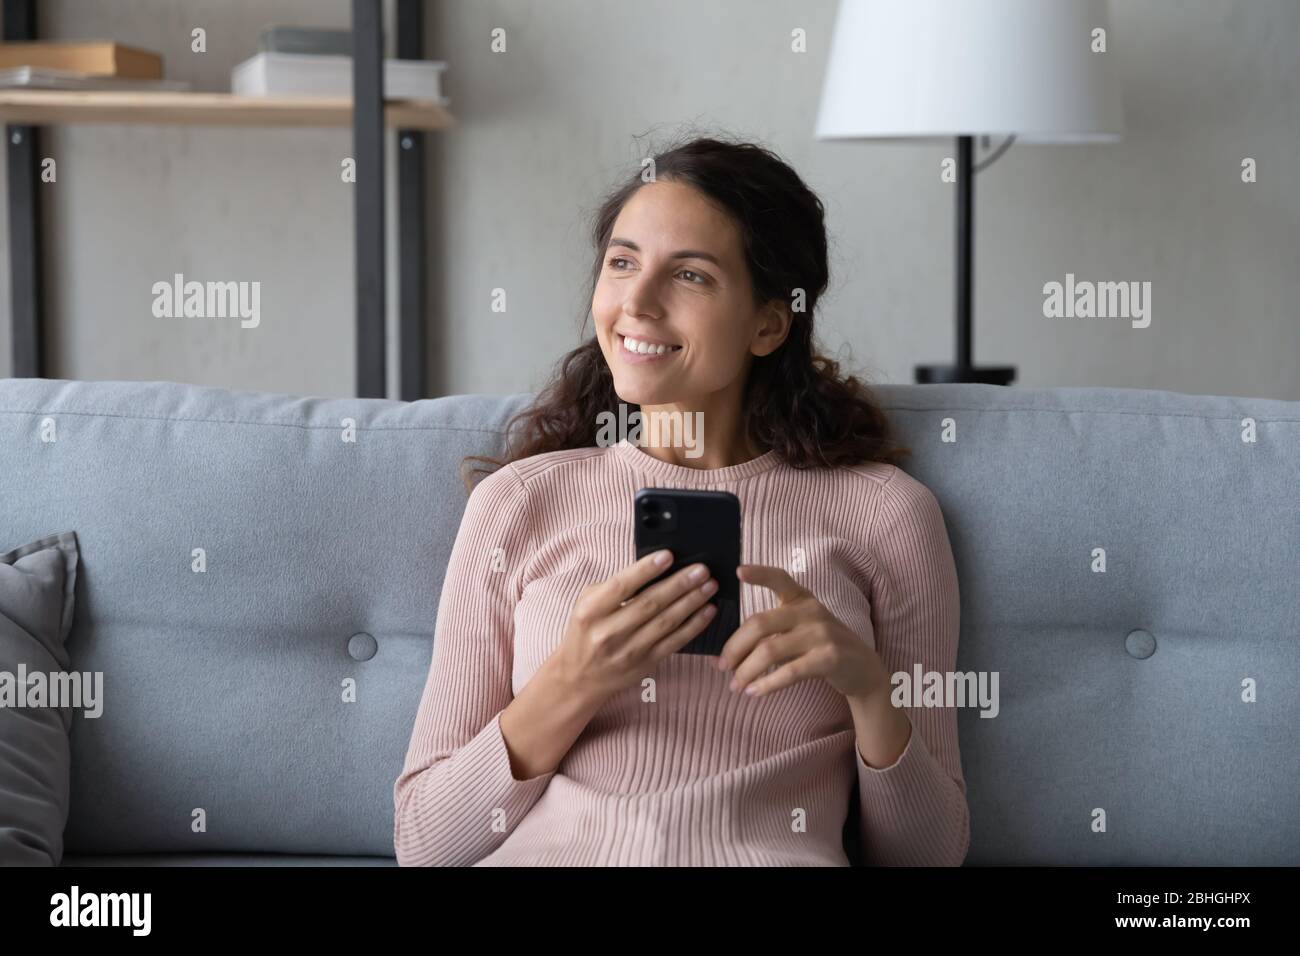 Distracted young smiling woman resting on sofa, holding smartphone. Stock Photo